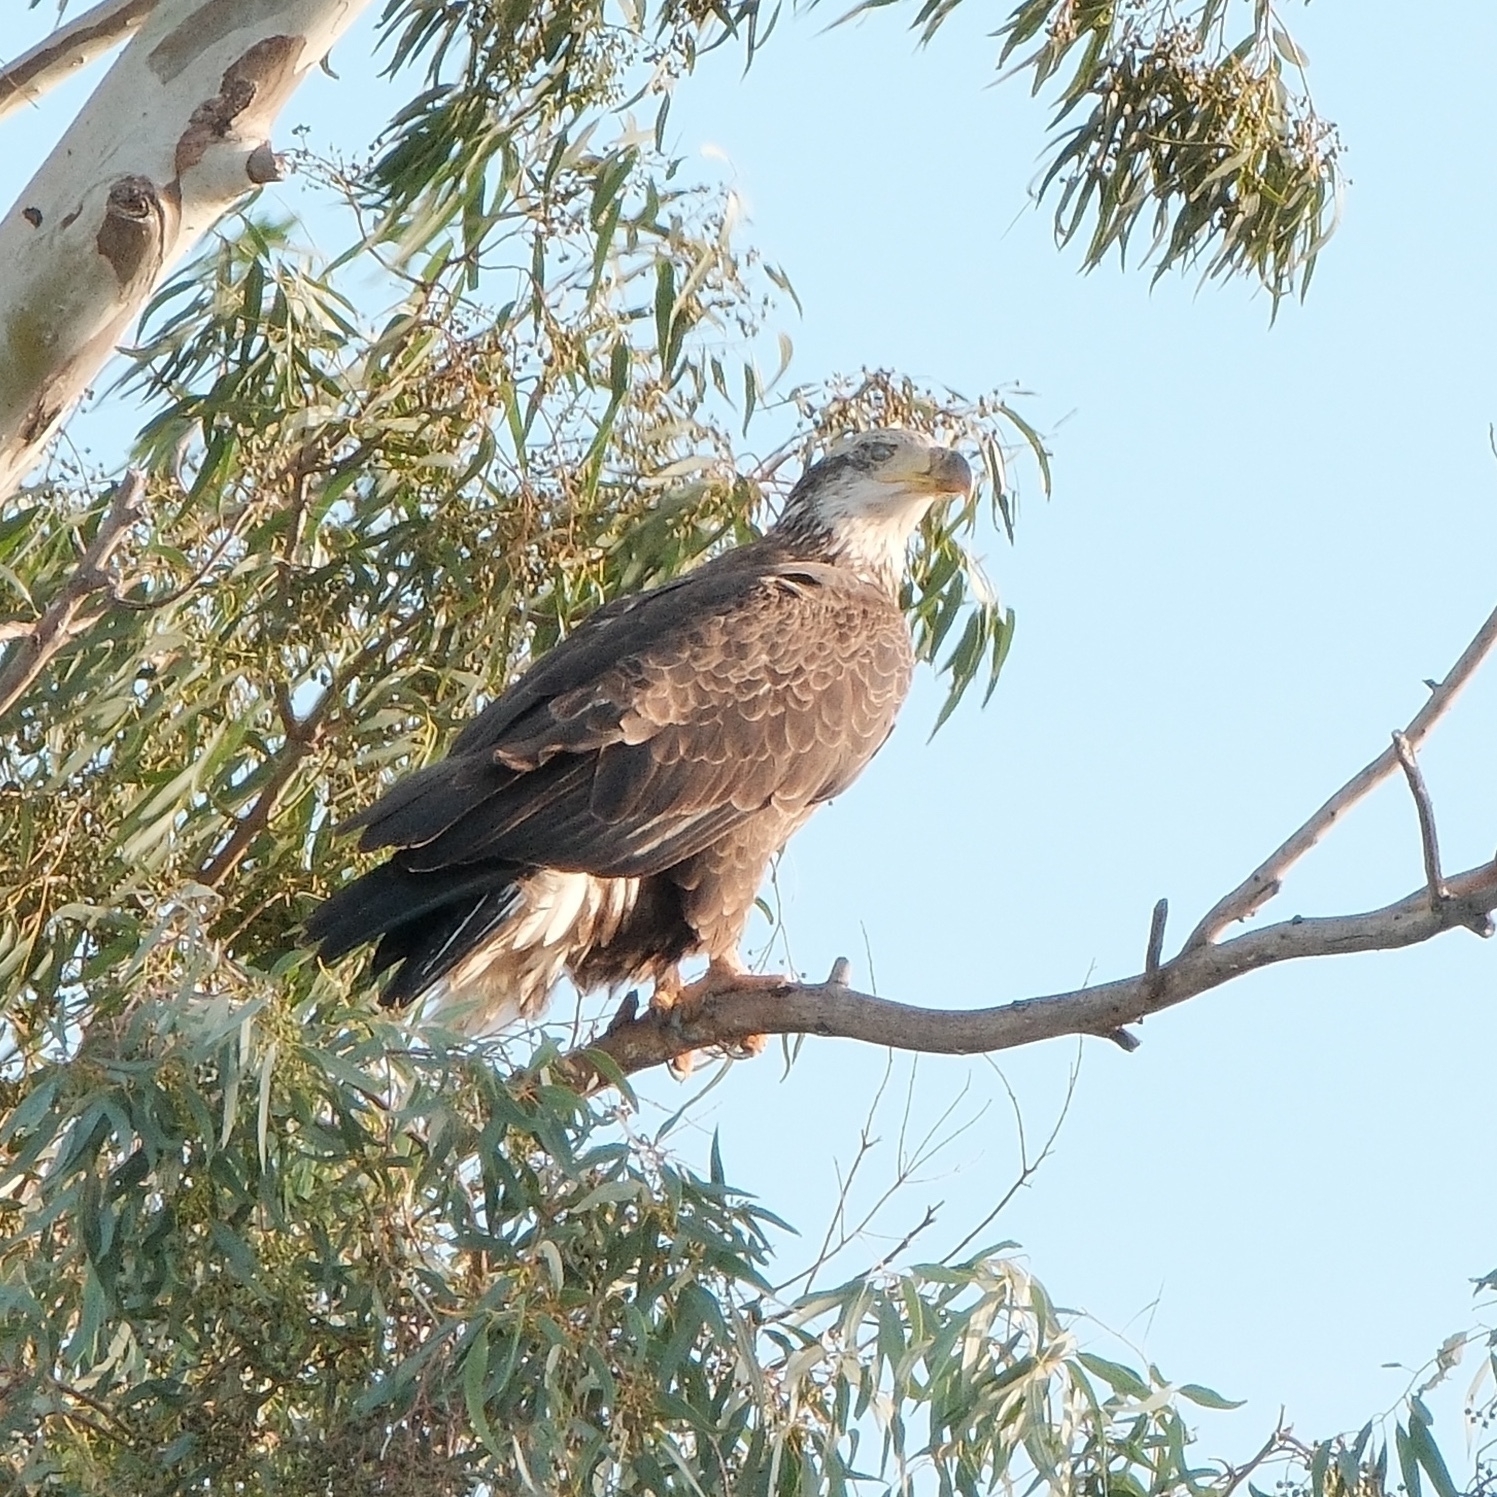 A juvenile Bald Eagle perched up high.  It is mostly brown with a developing, and so mottled,  white neck and head